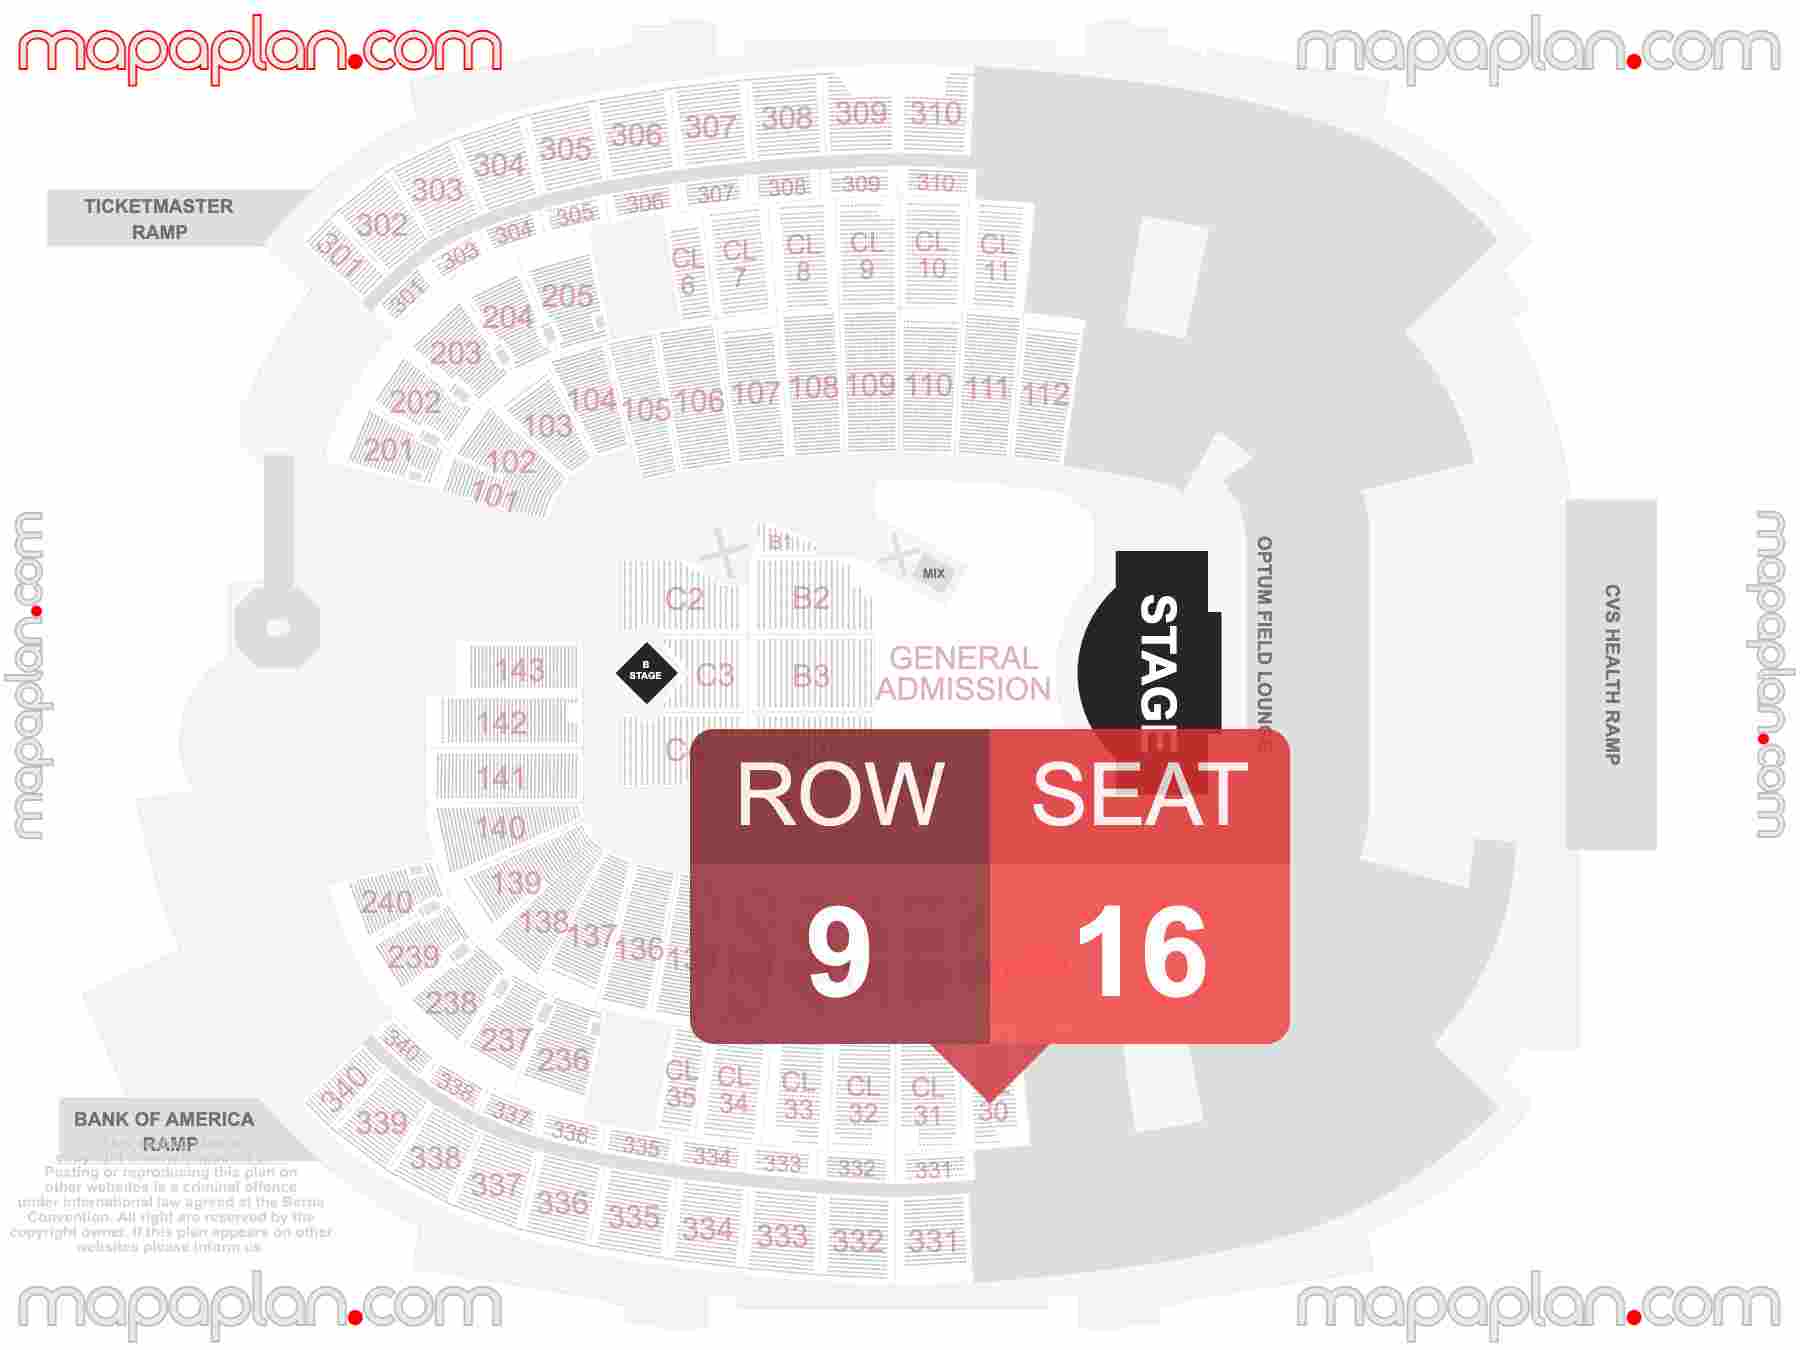 Foxborough Gillette Stadium seating chart Concert with floor general admission standing interactive seating checker map plan showing seat numbers per row - Ticket prices sections review diagram